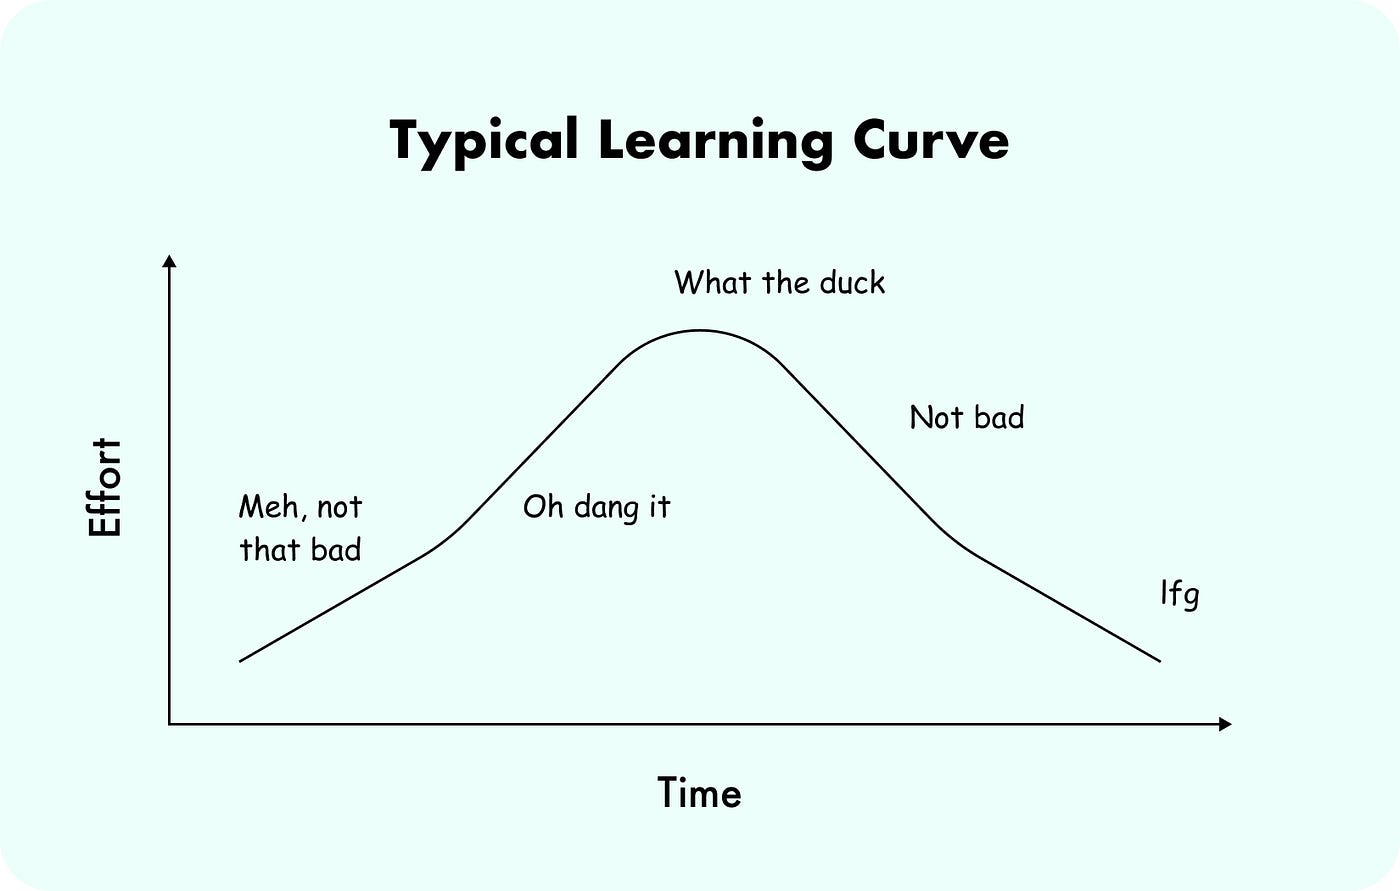 Overcoming the product management learning curve, by Gonzalo Soto